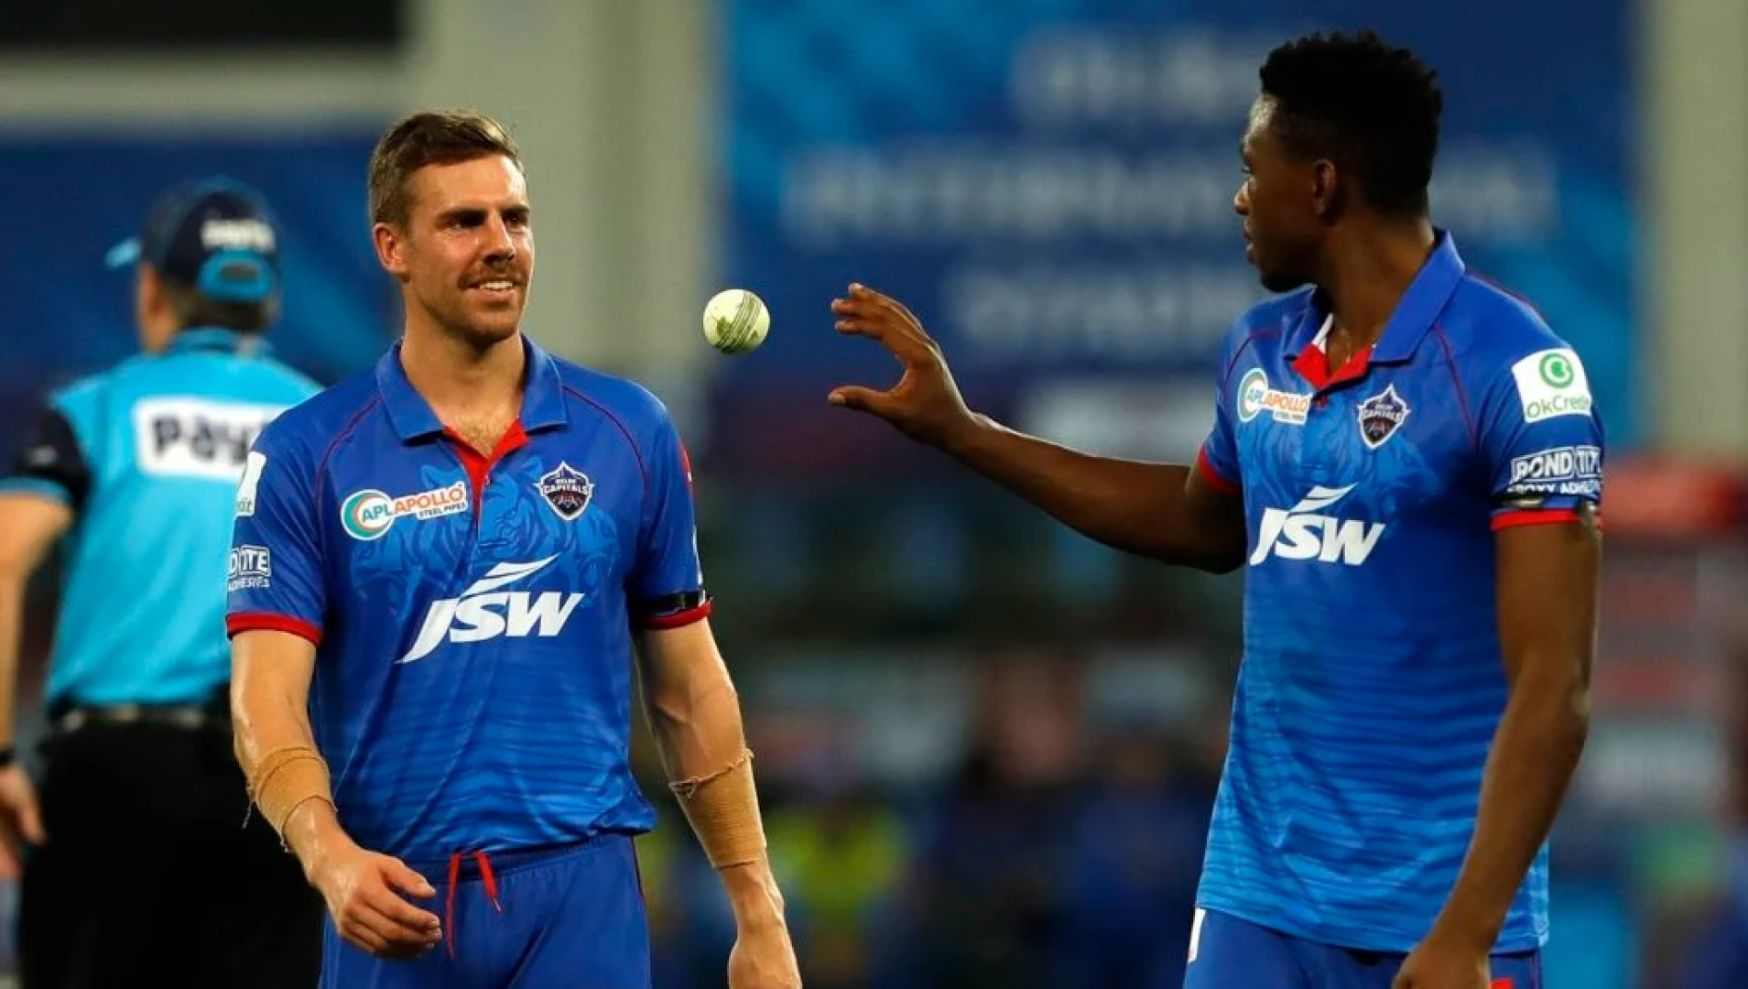 With Rabada, Nortje not available full time, Delhi Capitals in a spot of bother ahead of IPL Mini auction